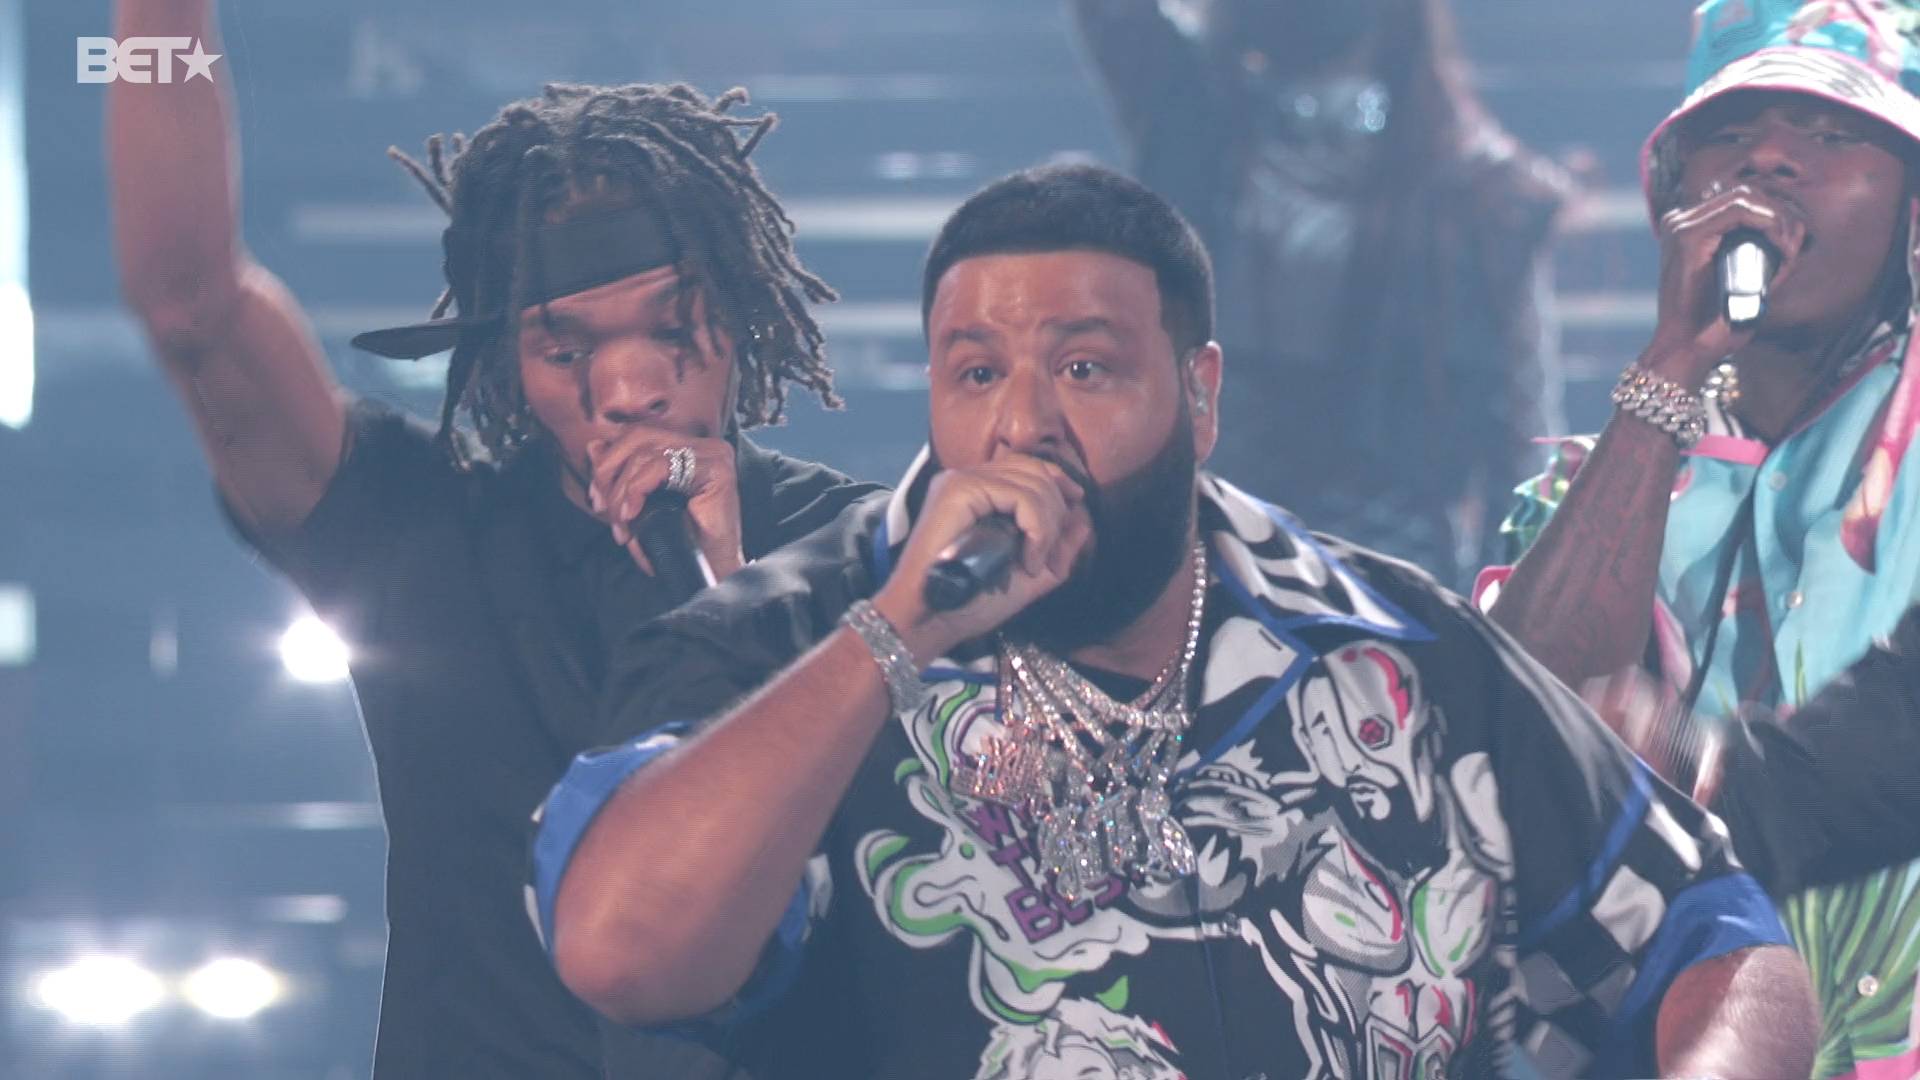 Lil Baby and Lil Durk perform "Hats Off" before joining DJ Khaled for "EVERY CHANCE I GET," and Megan Thee Stallion and DaBaby help them finish strong with "I DID IT."